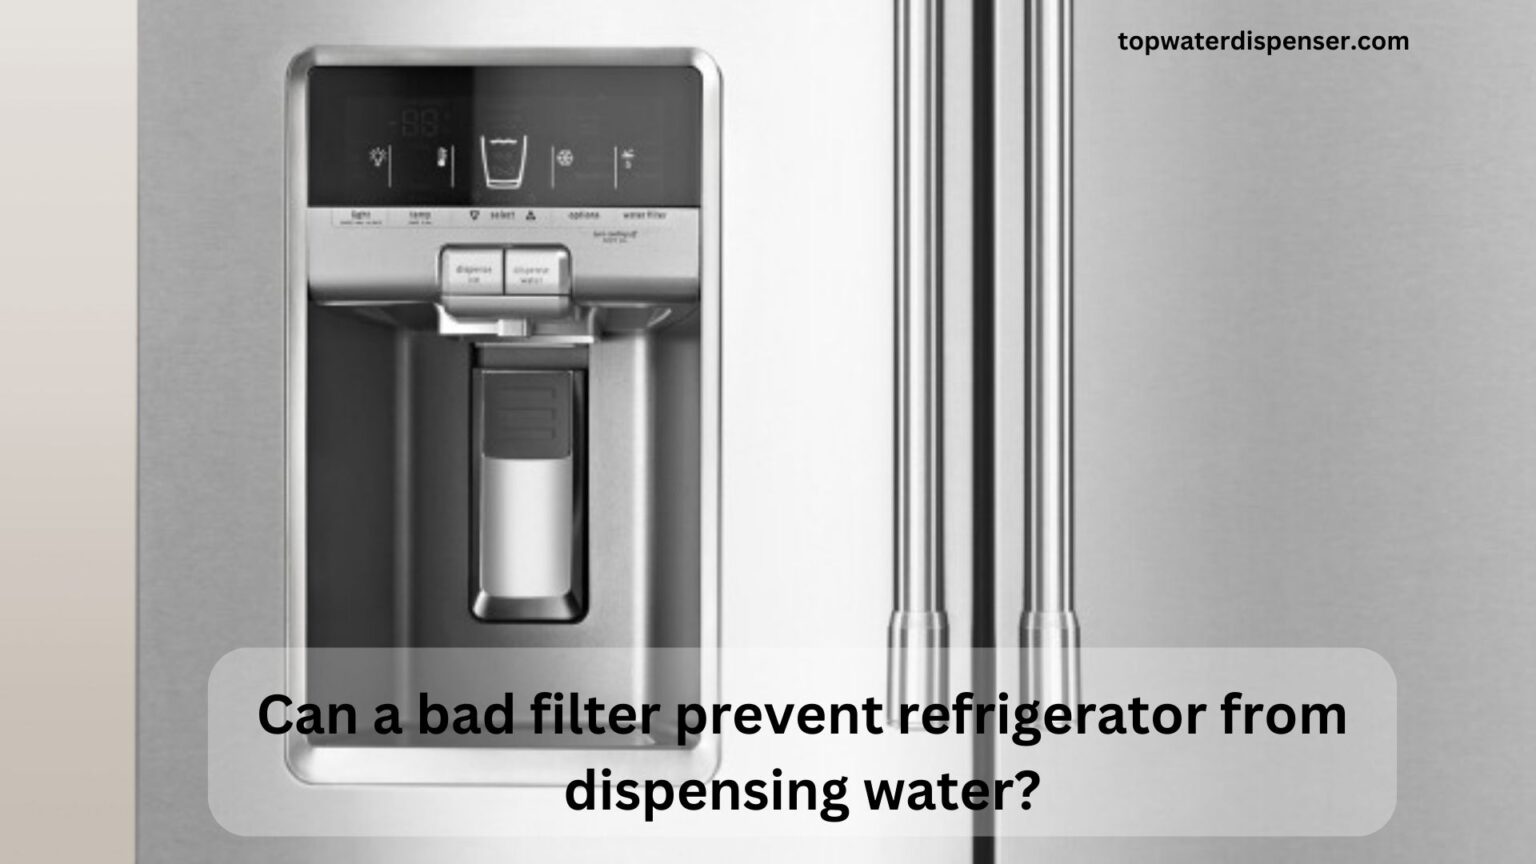 Can a bad filter prevent refrigerator from dispensing water?